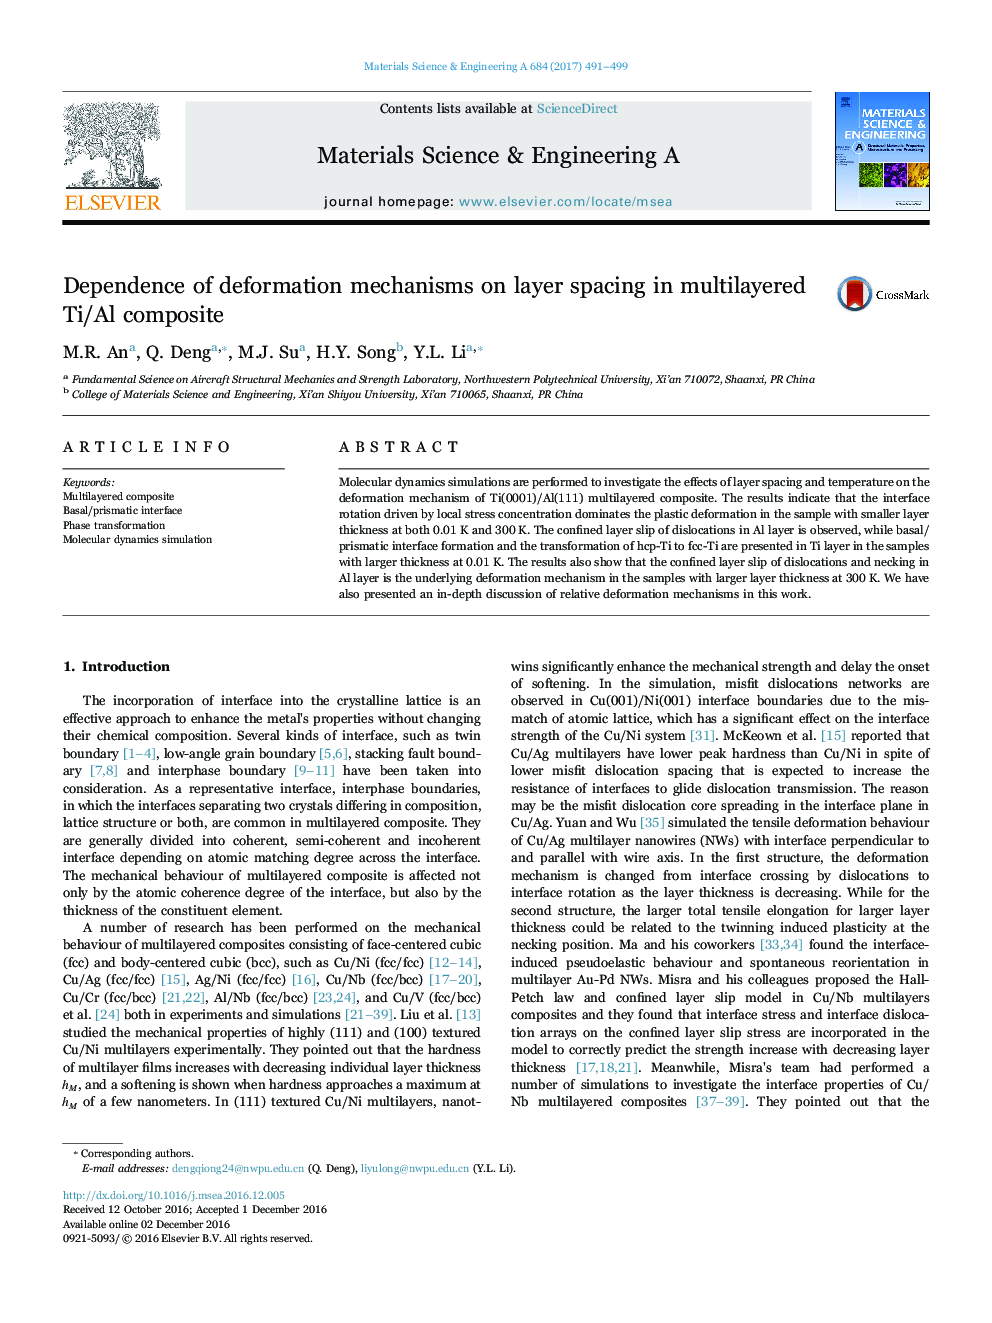 Dependence of deformation mechanisms on layer spacing in multilayered Ti/Al composite